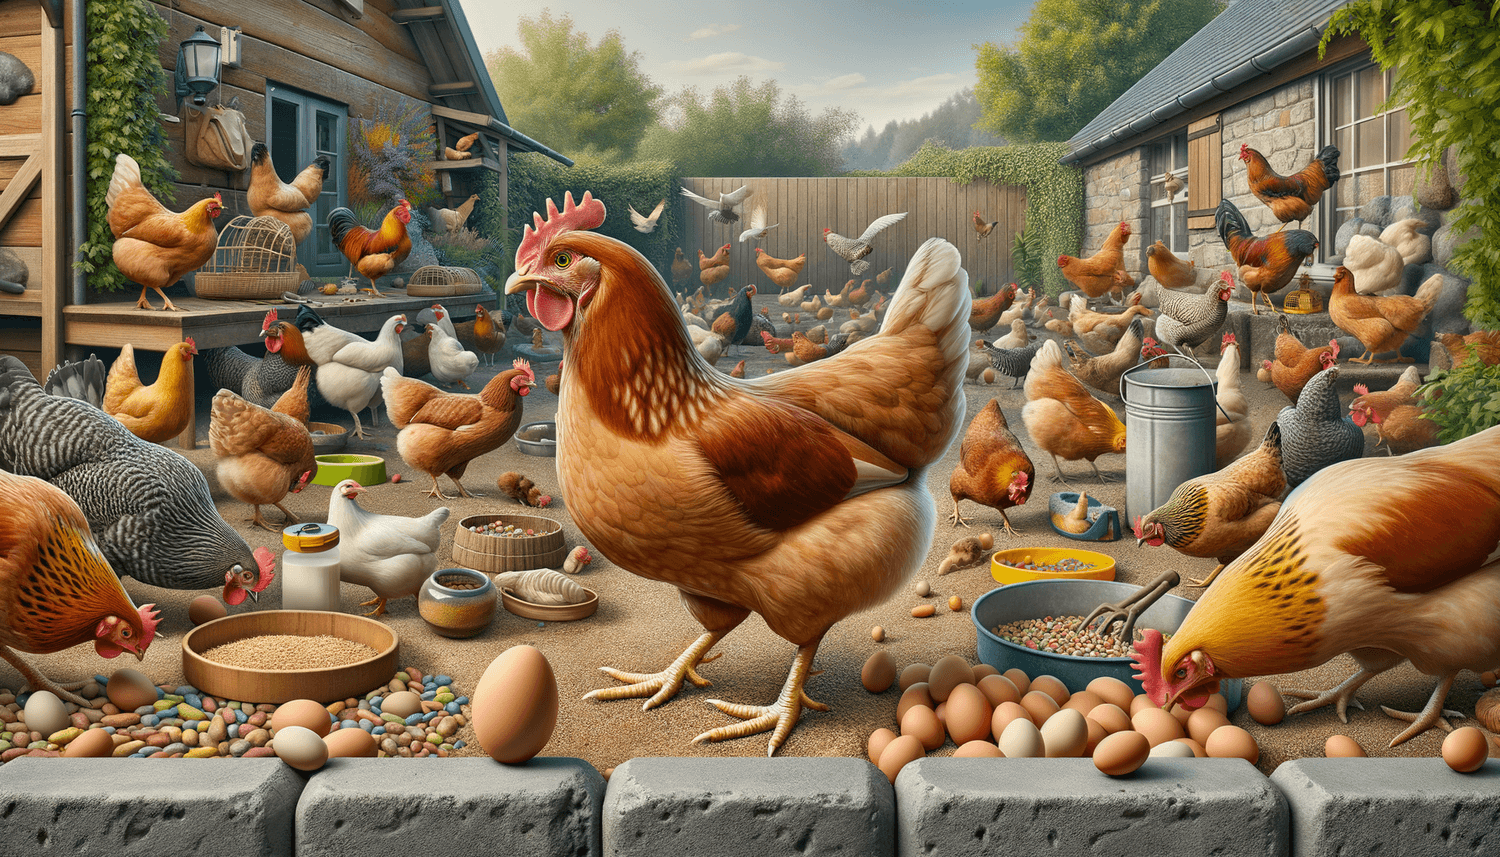 Why Do Chickens Lay Eggs Every Day?